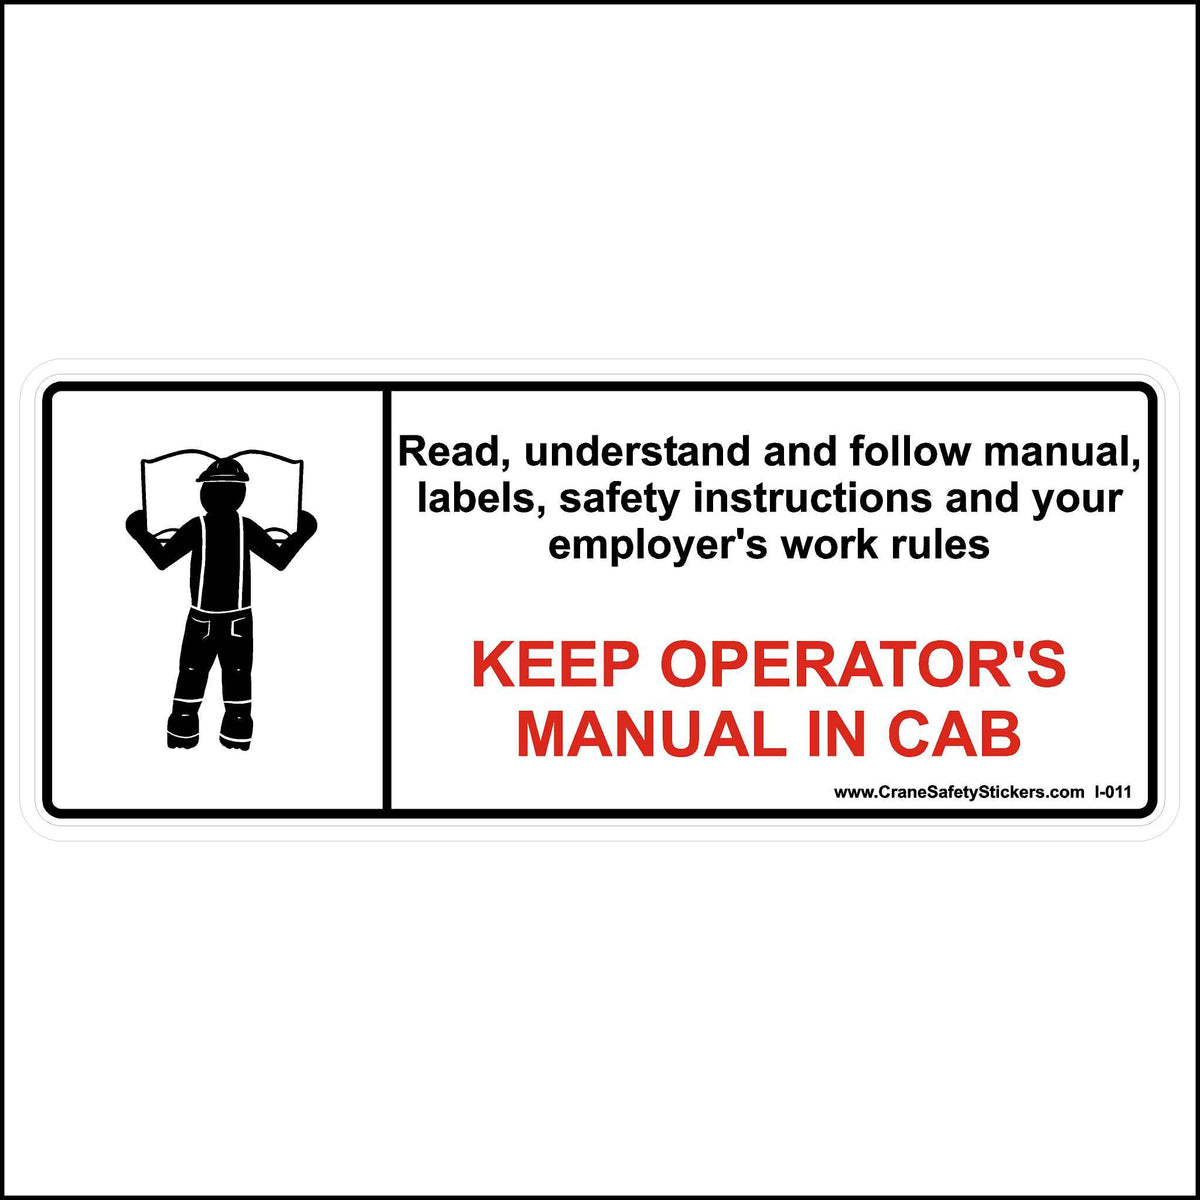 Keep Operators Manual in Cab Sticker Printed With. Keep Operator&#39;s Manual In Cab Read, understand, and follow the manual, labels, safety instructions, and your employer&#39;s work rules. Printed in black and red on a white background.